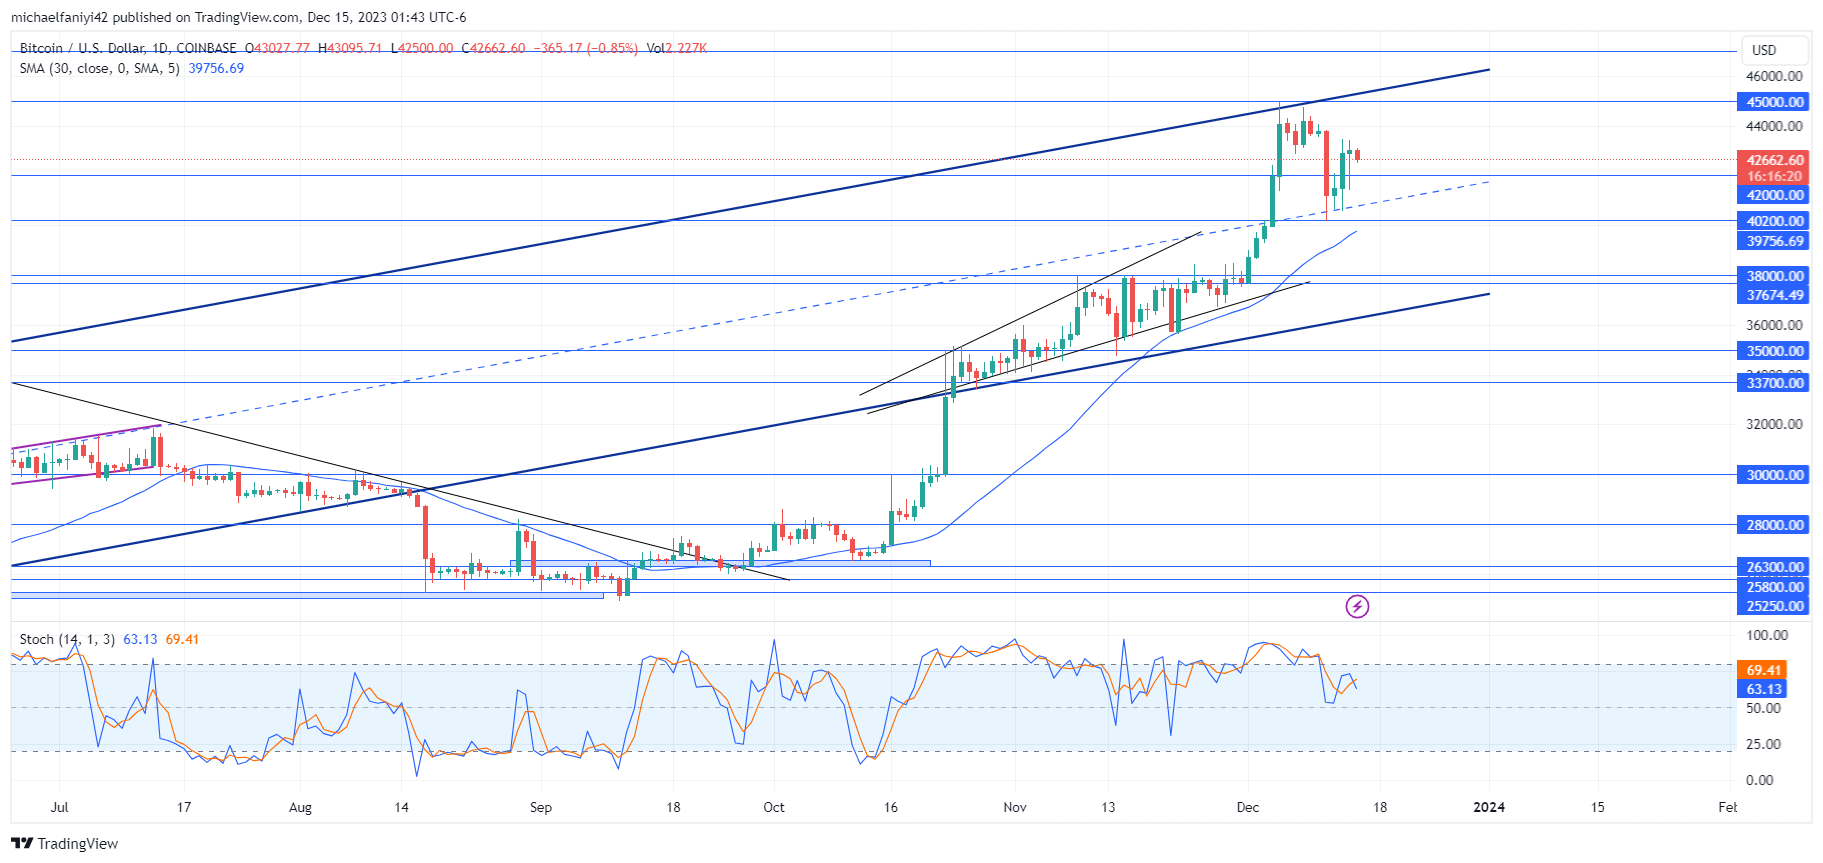 Bitcoin (BTCUSD) is Set to Re-test the $45,000 Resistance